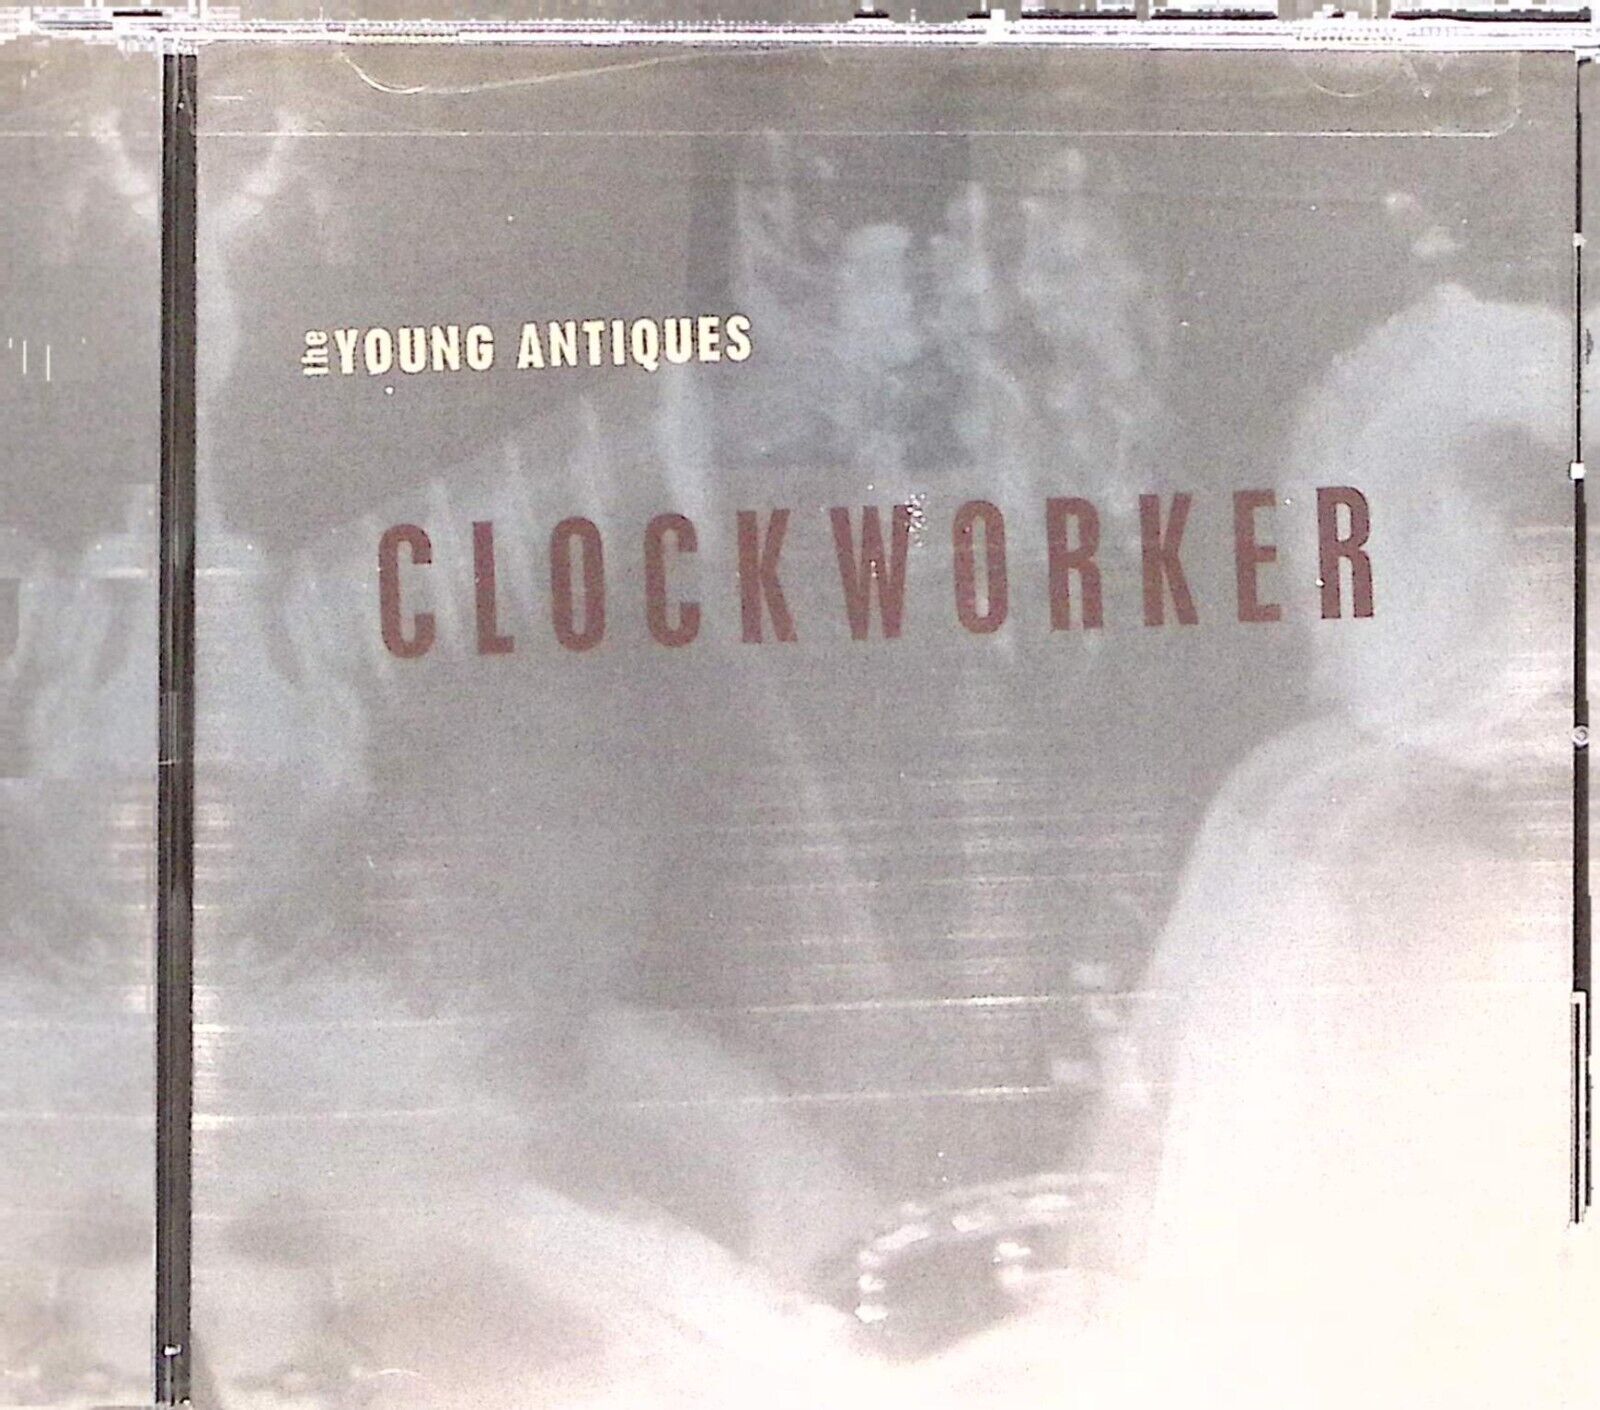 THE YOUNG ANTIQUES  CLOCKWORKER  TWO SHEDS MUSIC  CD 2272